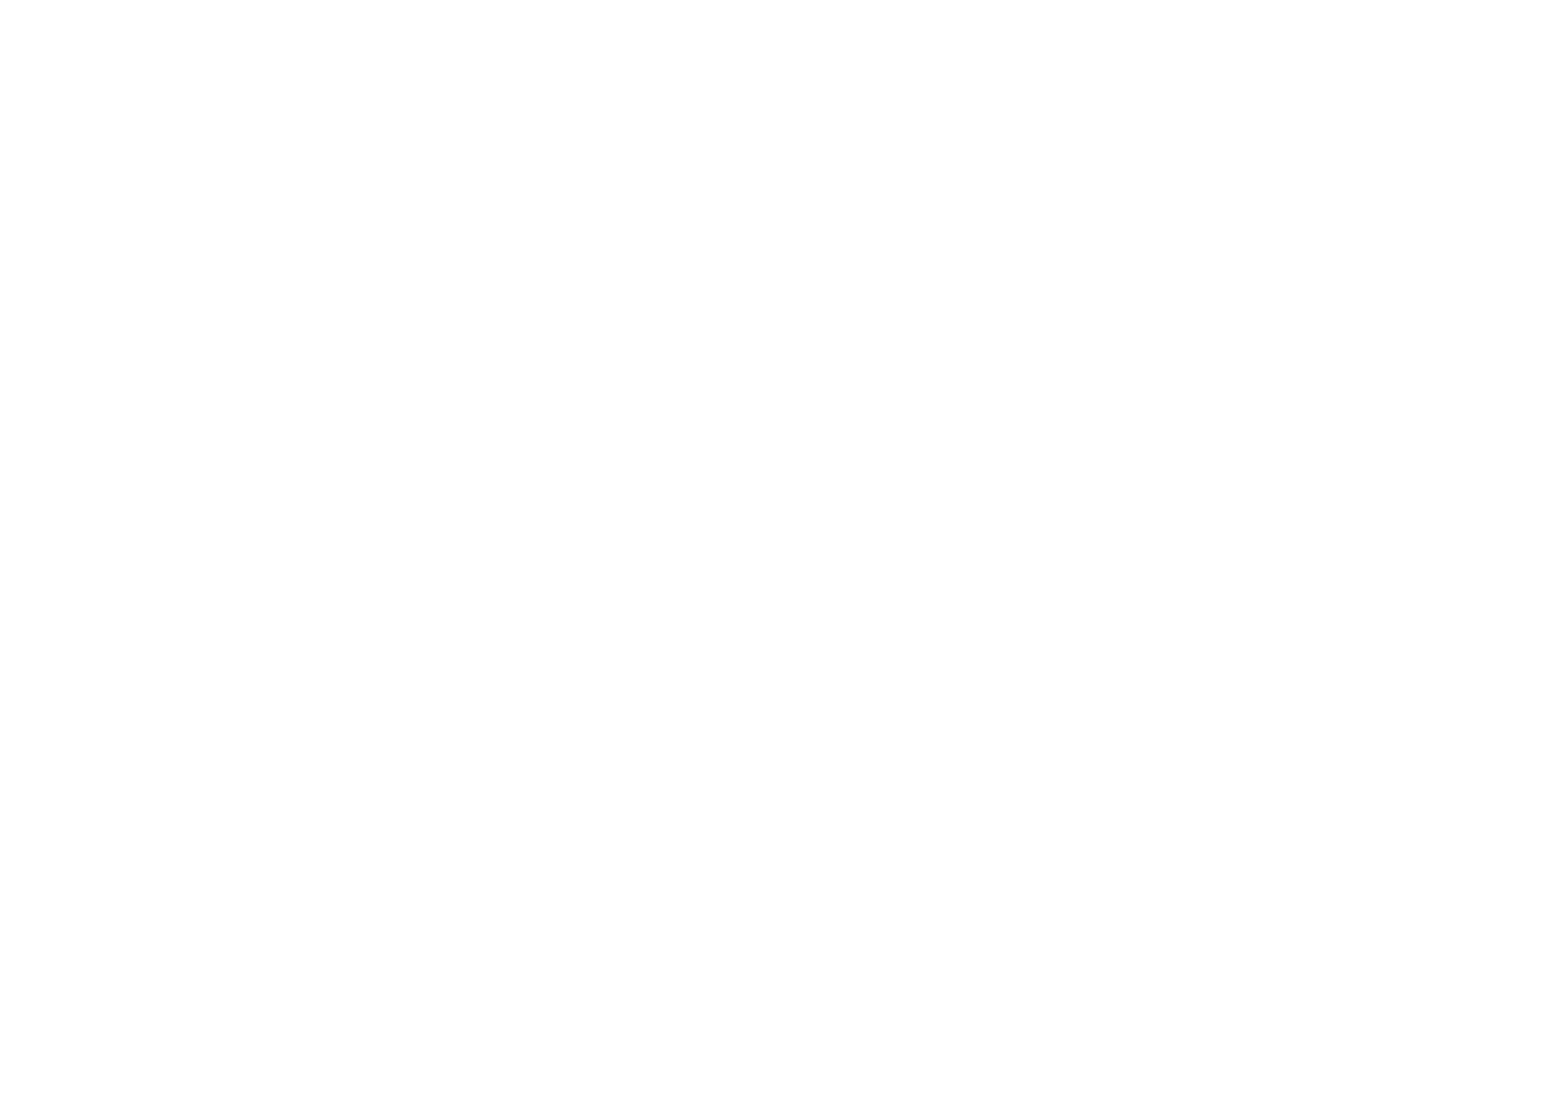 Kuwait Cement Company logo large for dark backgrounds (transparent PNG)